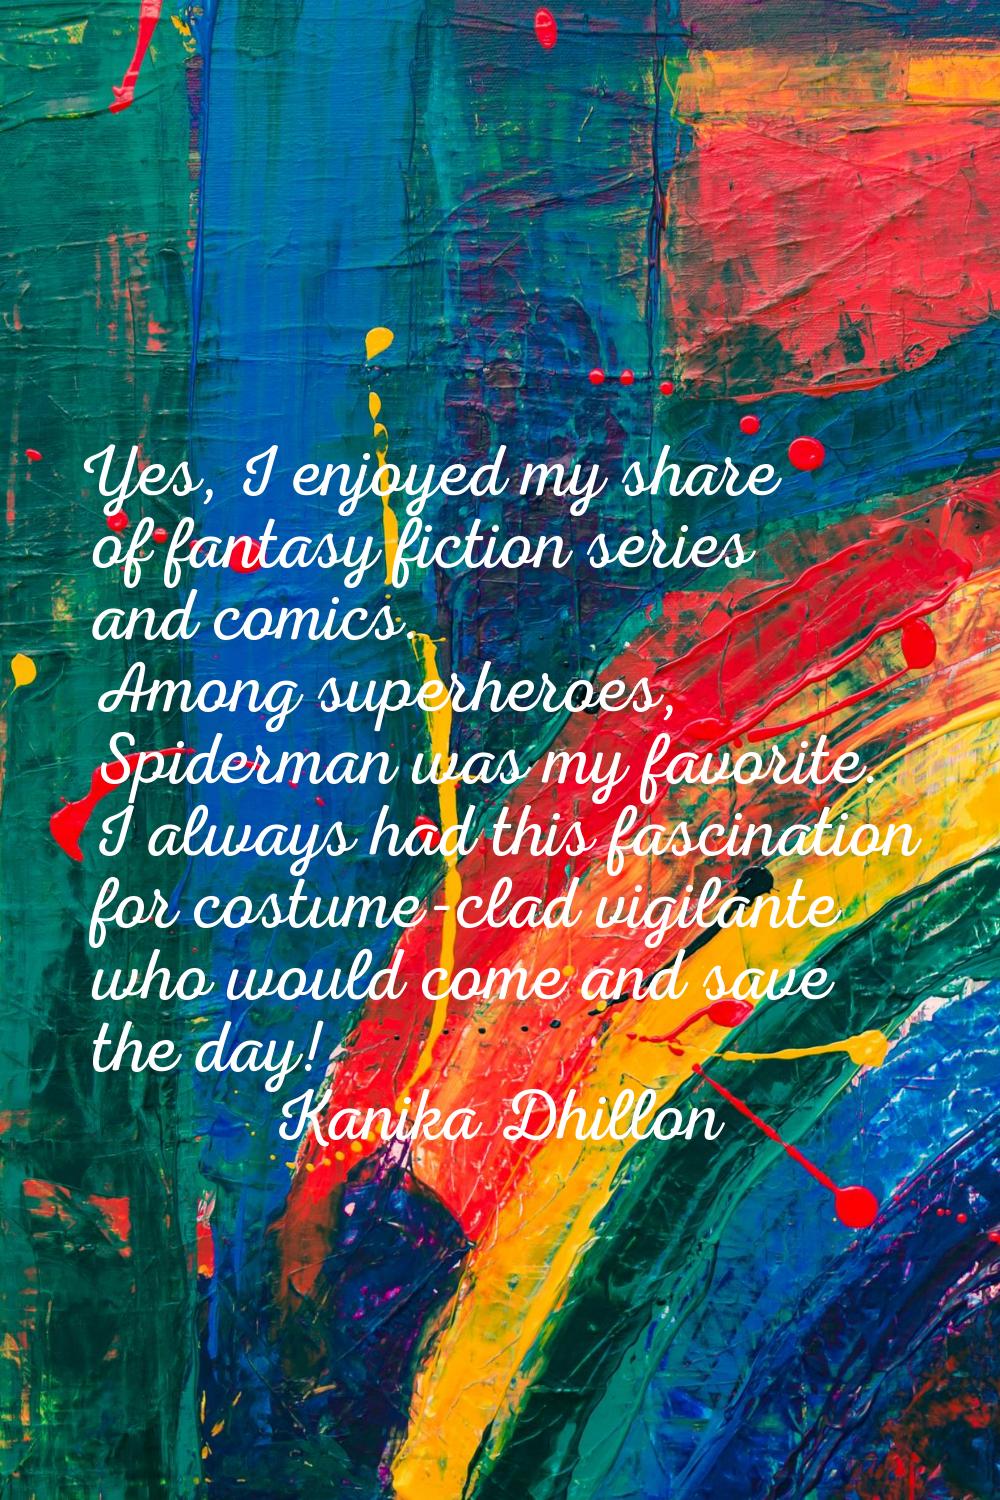 Yes, I enjoyed my share of fantasy fiction series and comics. Among superheroes, Spiderman was my f